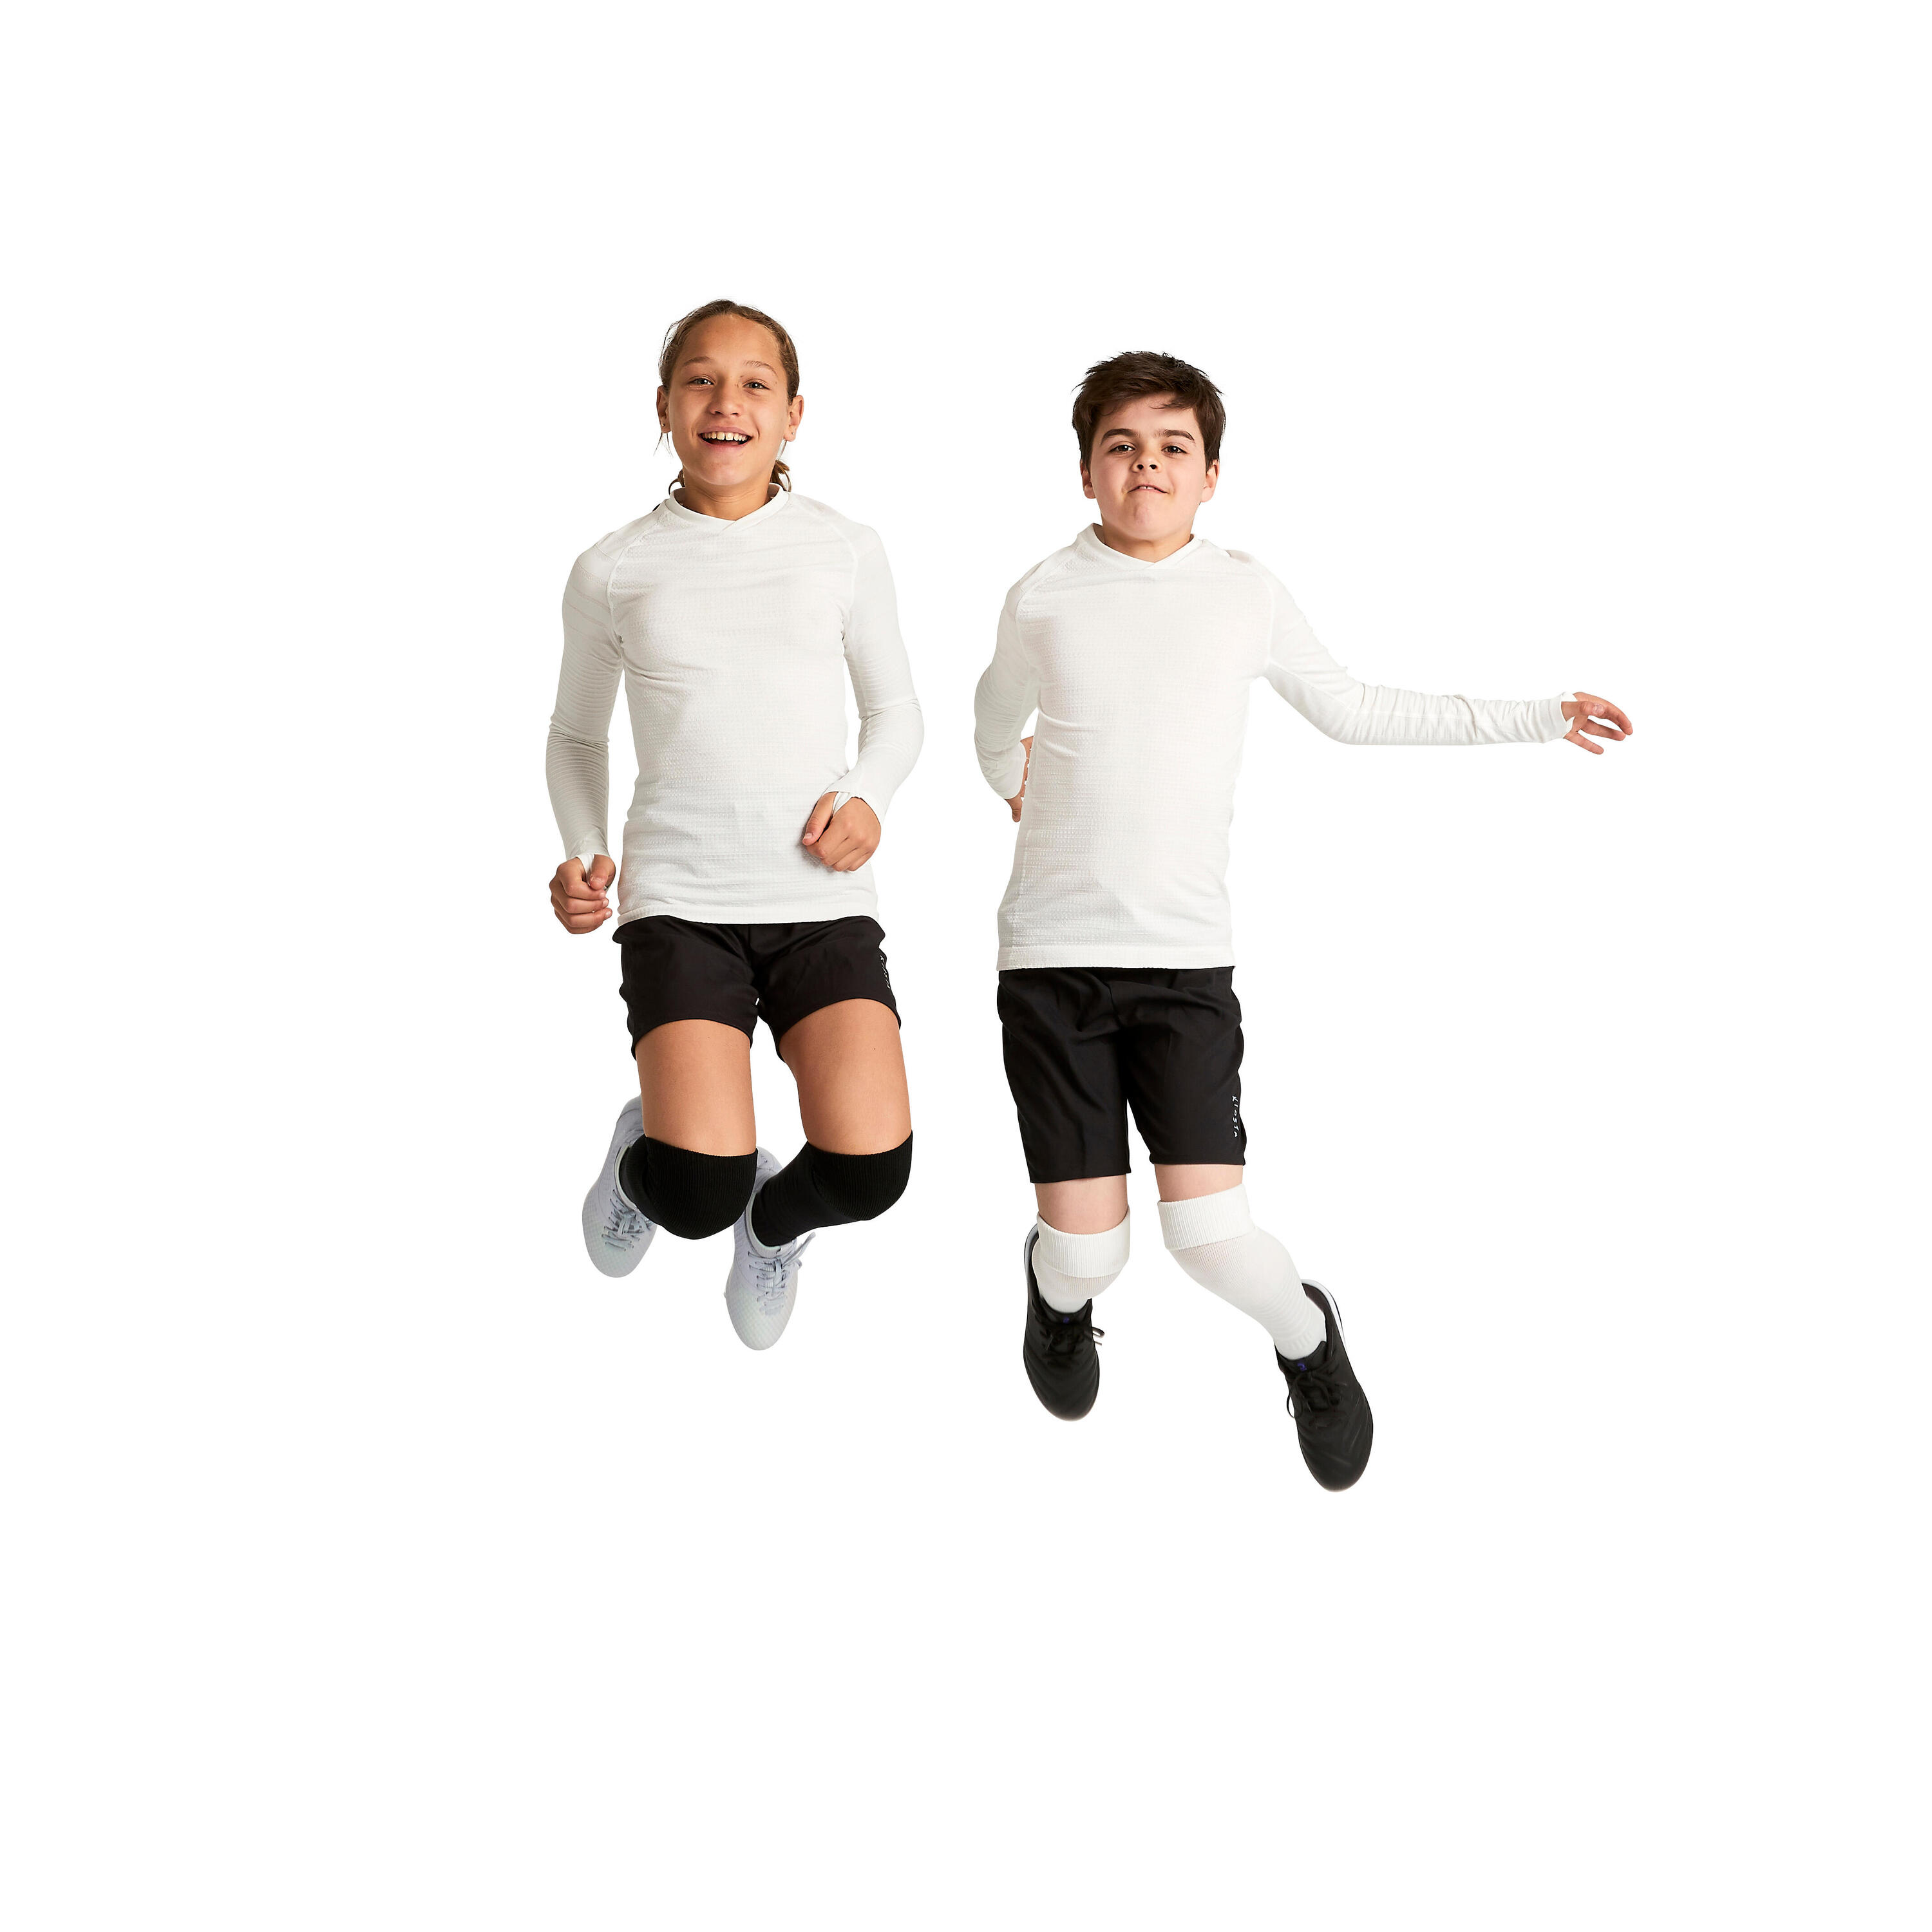 Kids' Long-Sleeved Thermal Base Layer Top Keepdry 500 - White 6/11